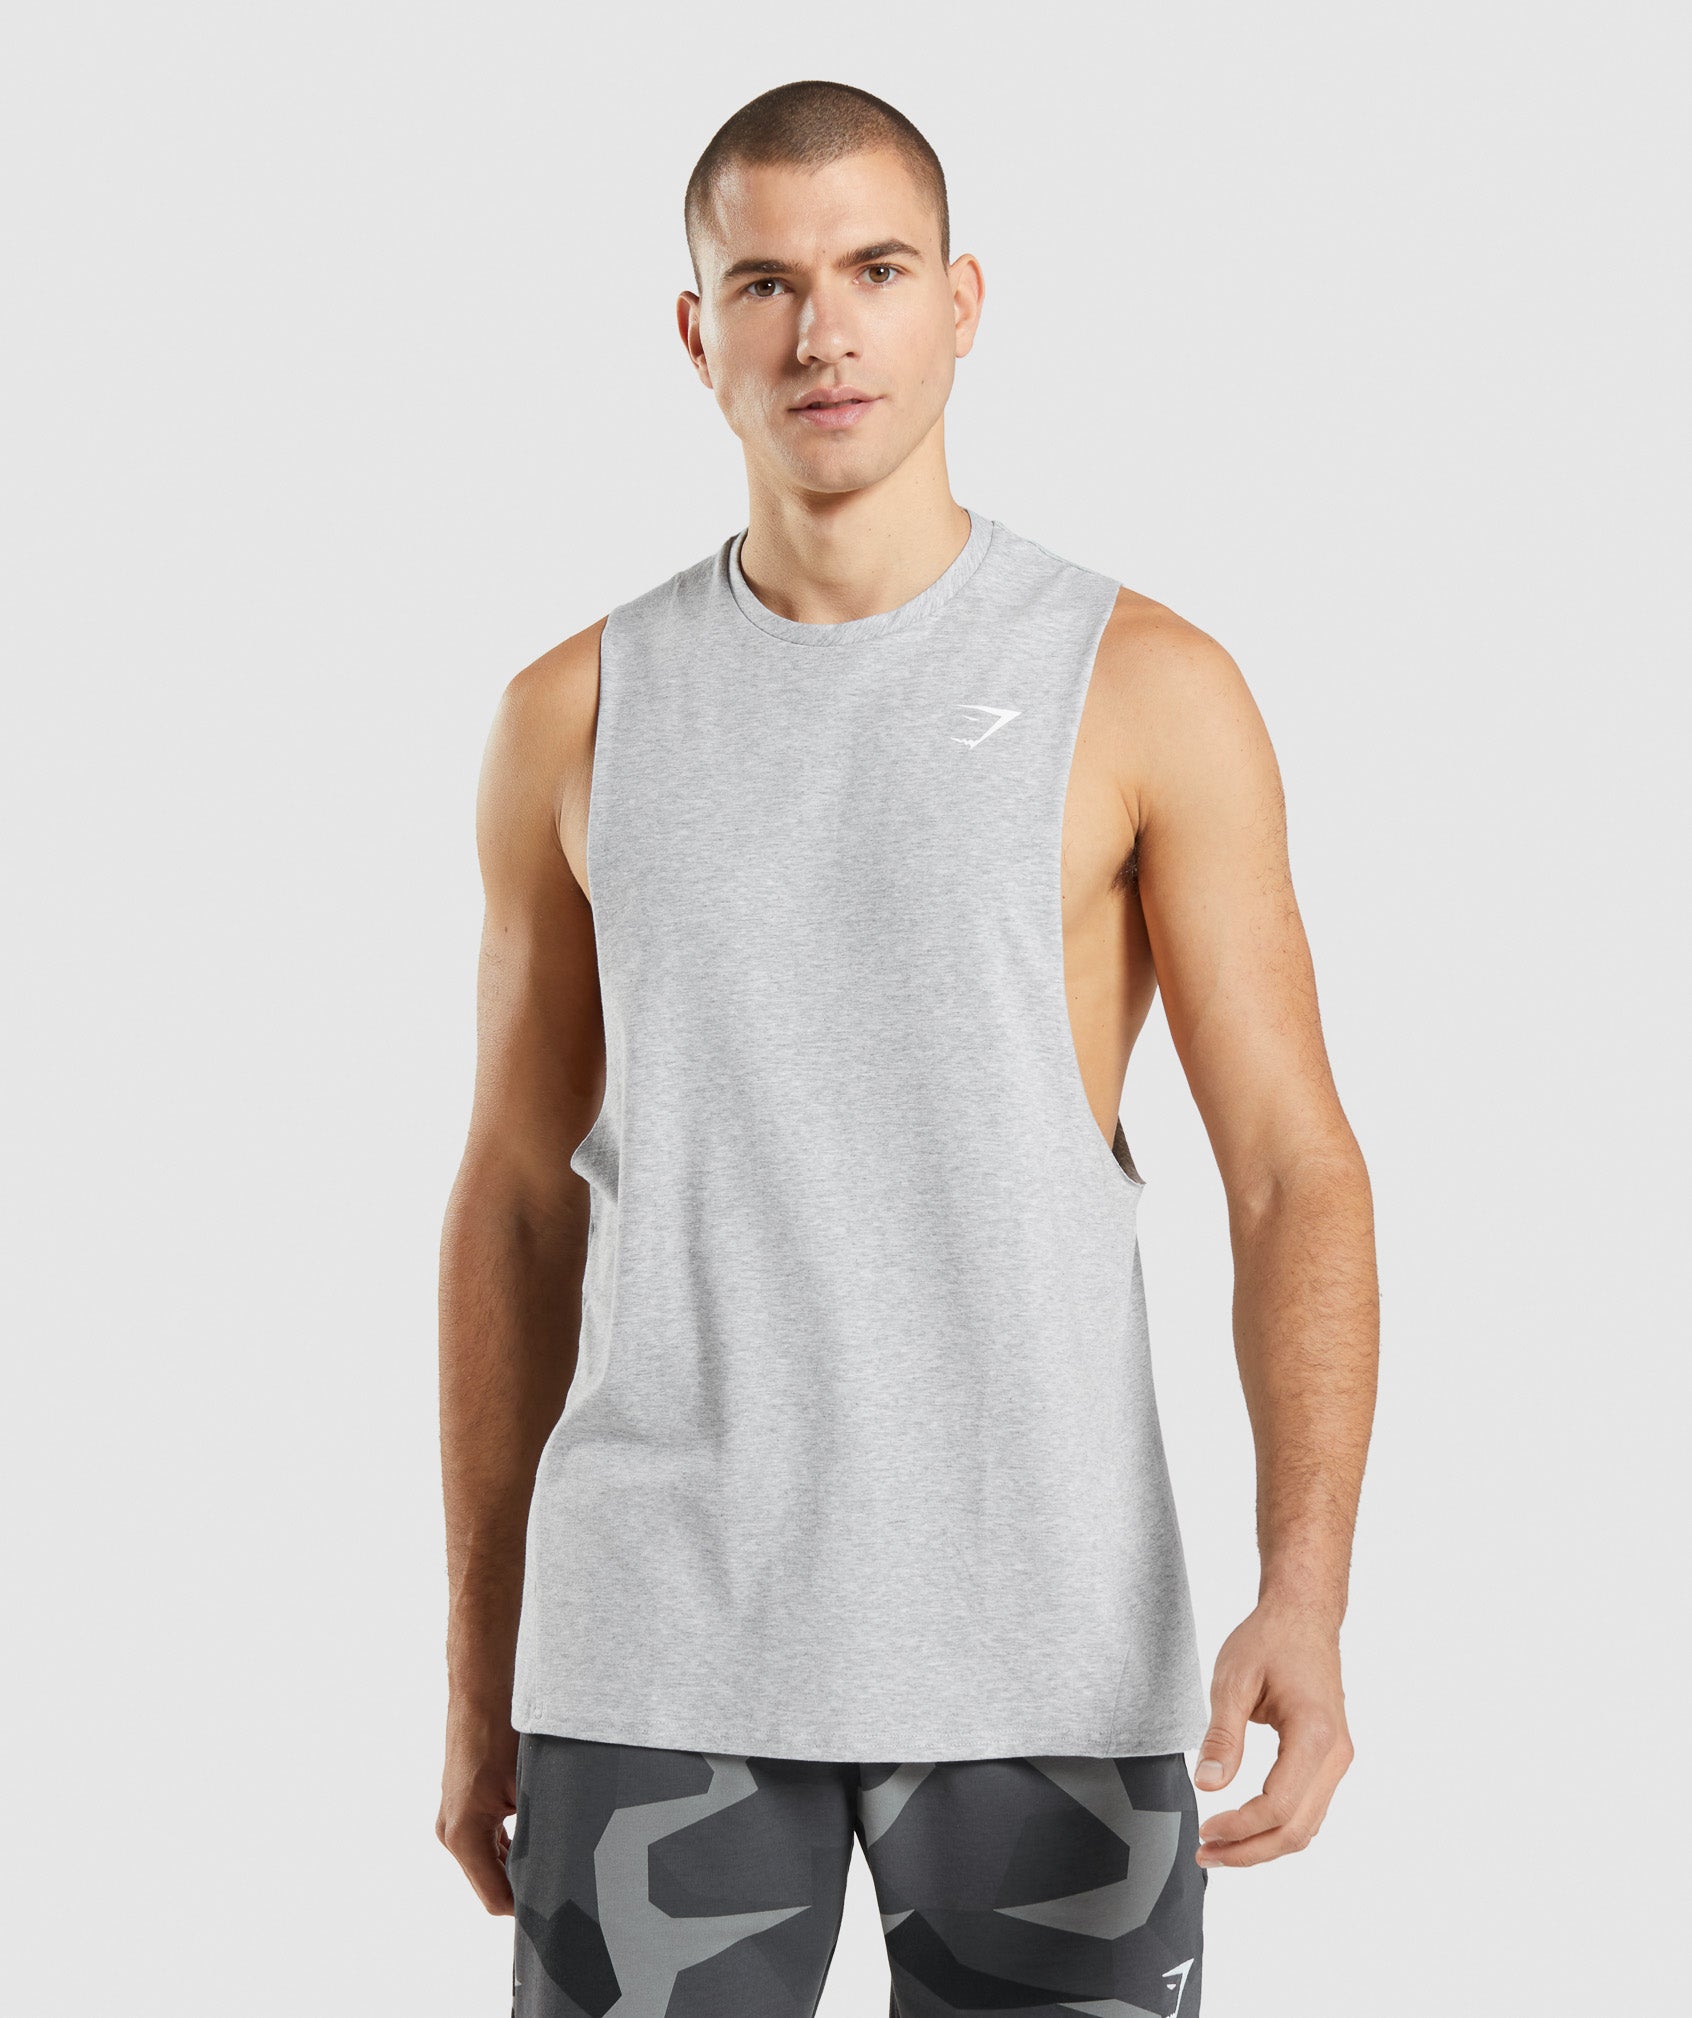 Critical Drop Arm Tank in Light Grey Marl is out of stock